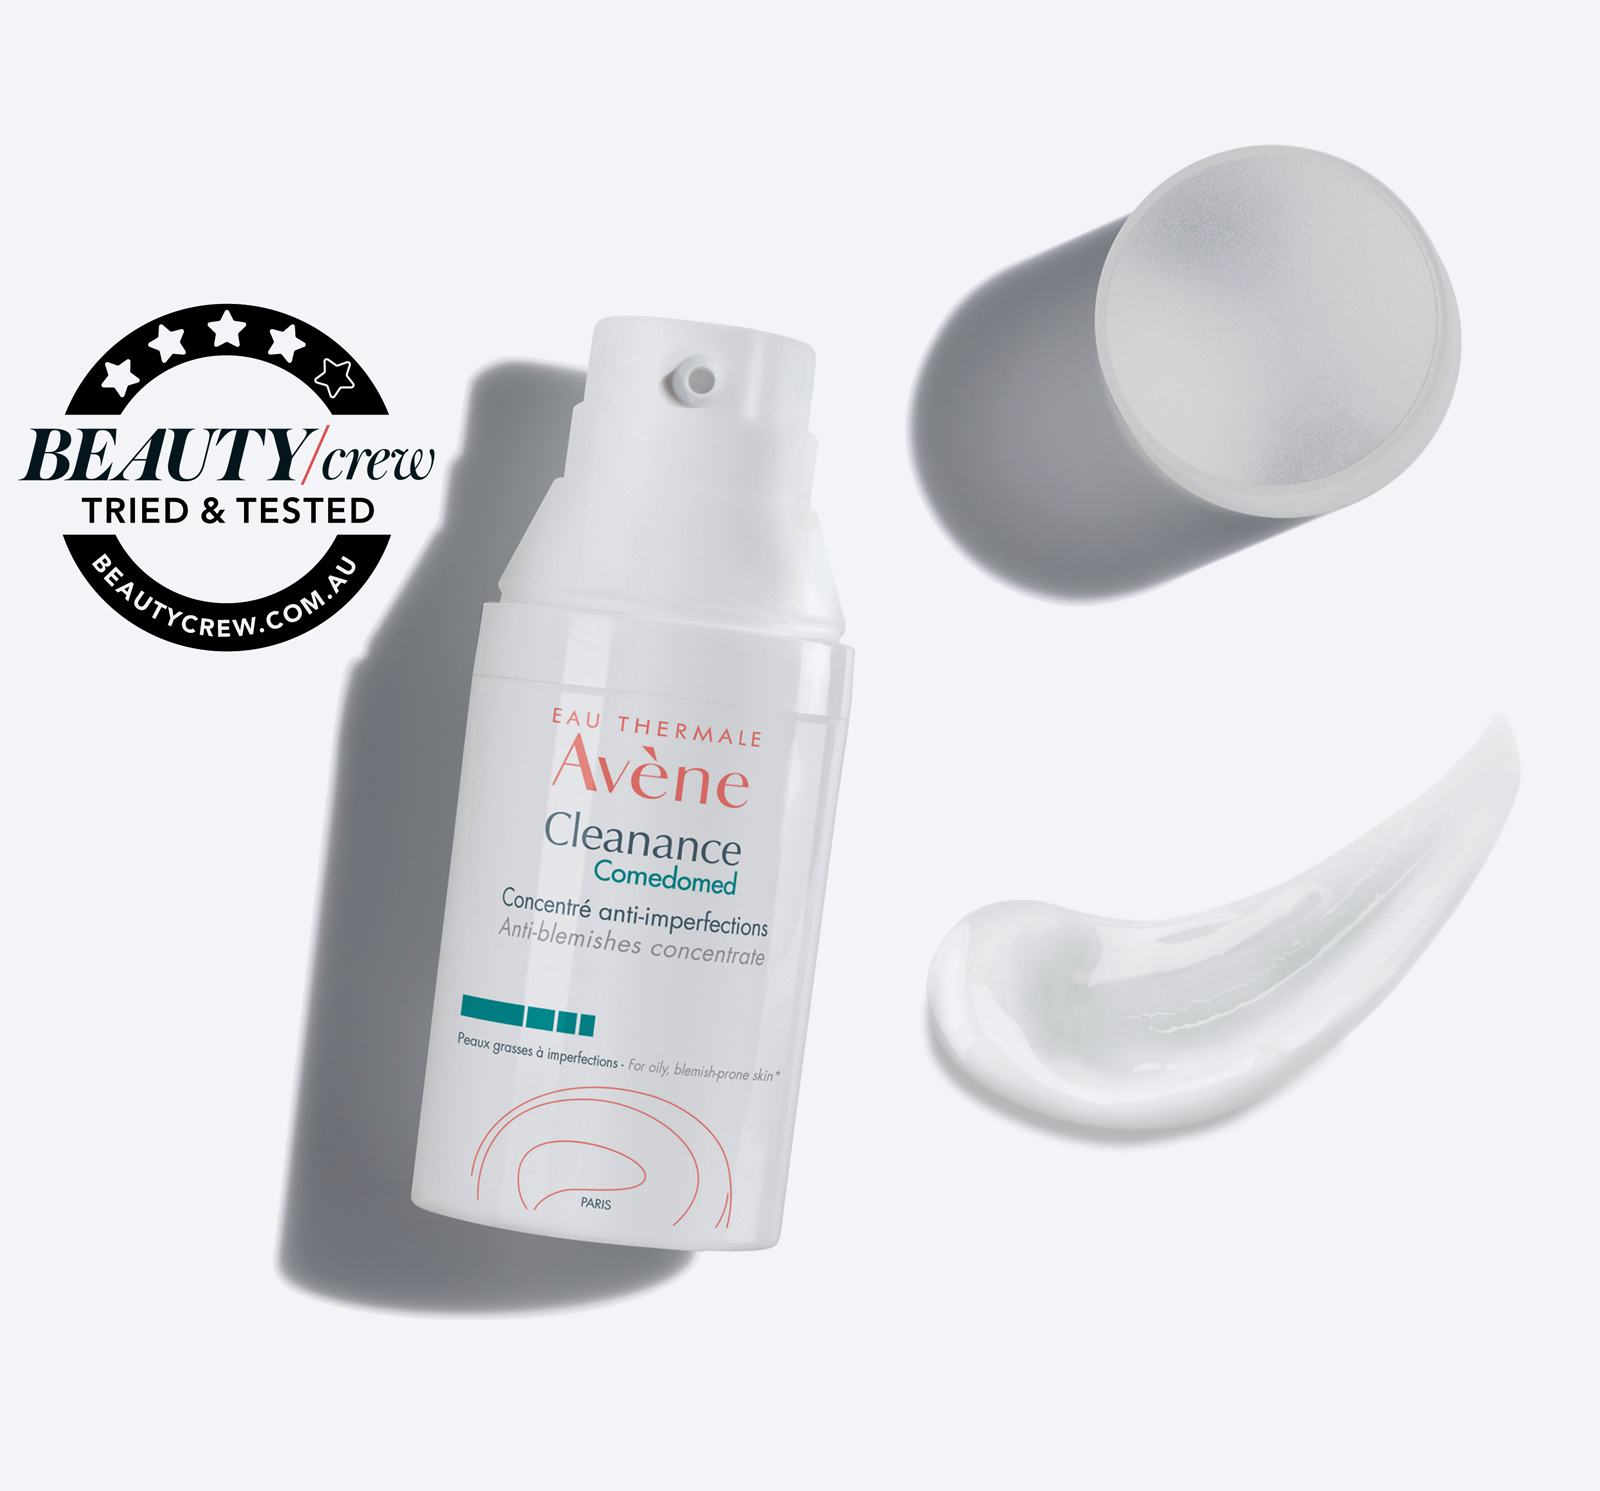 Avene Cleanance Comedomed - Beauty Crew tried and tested